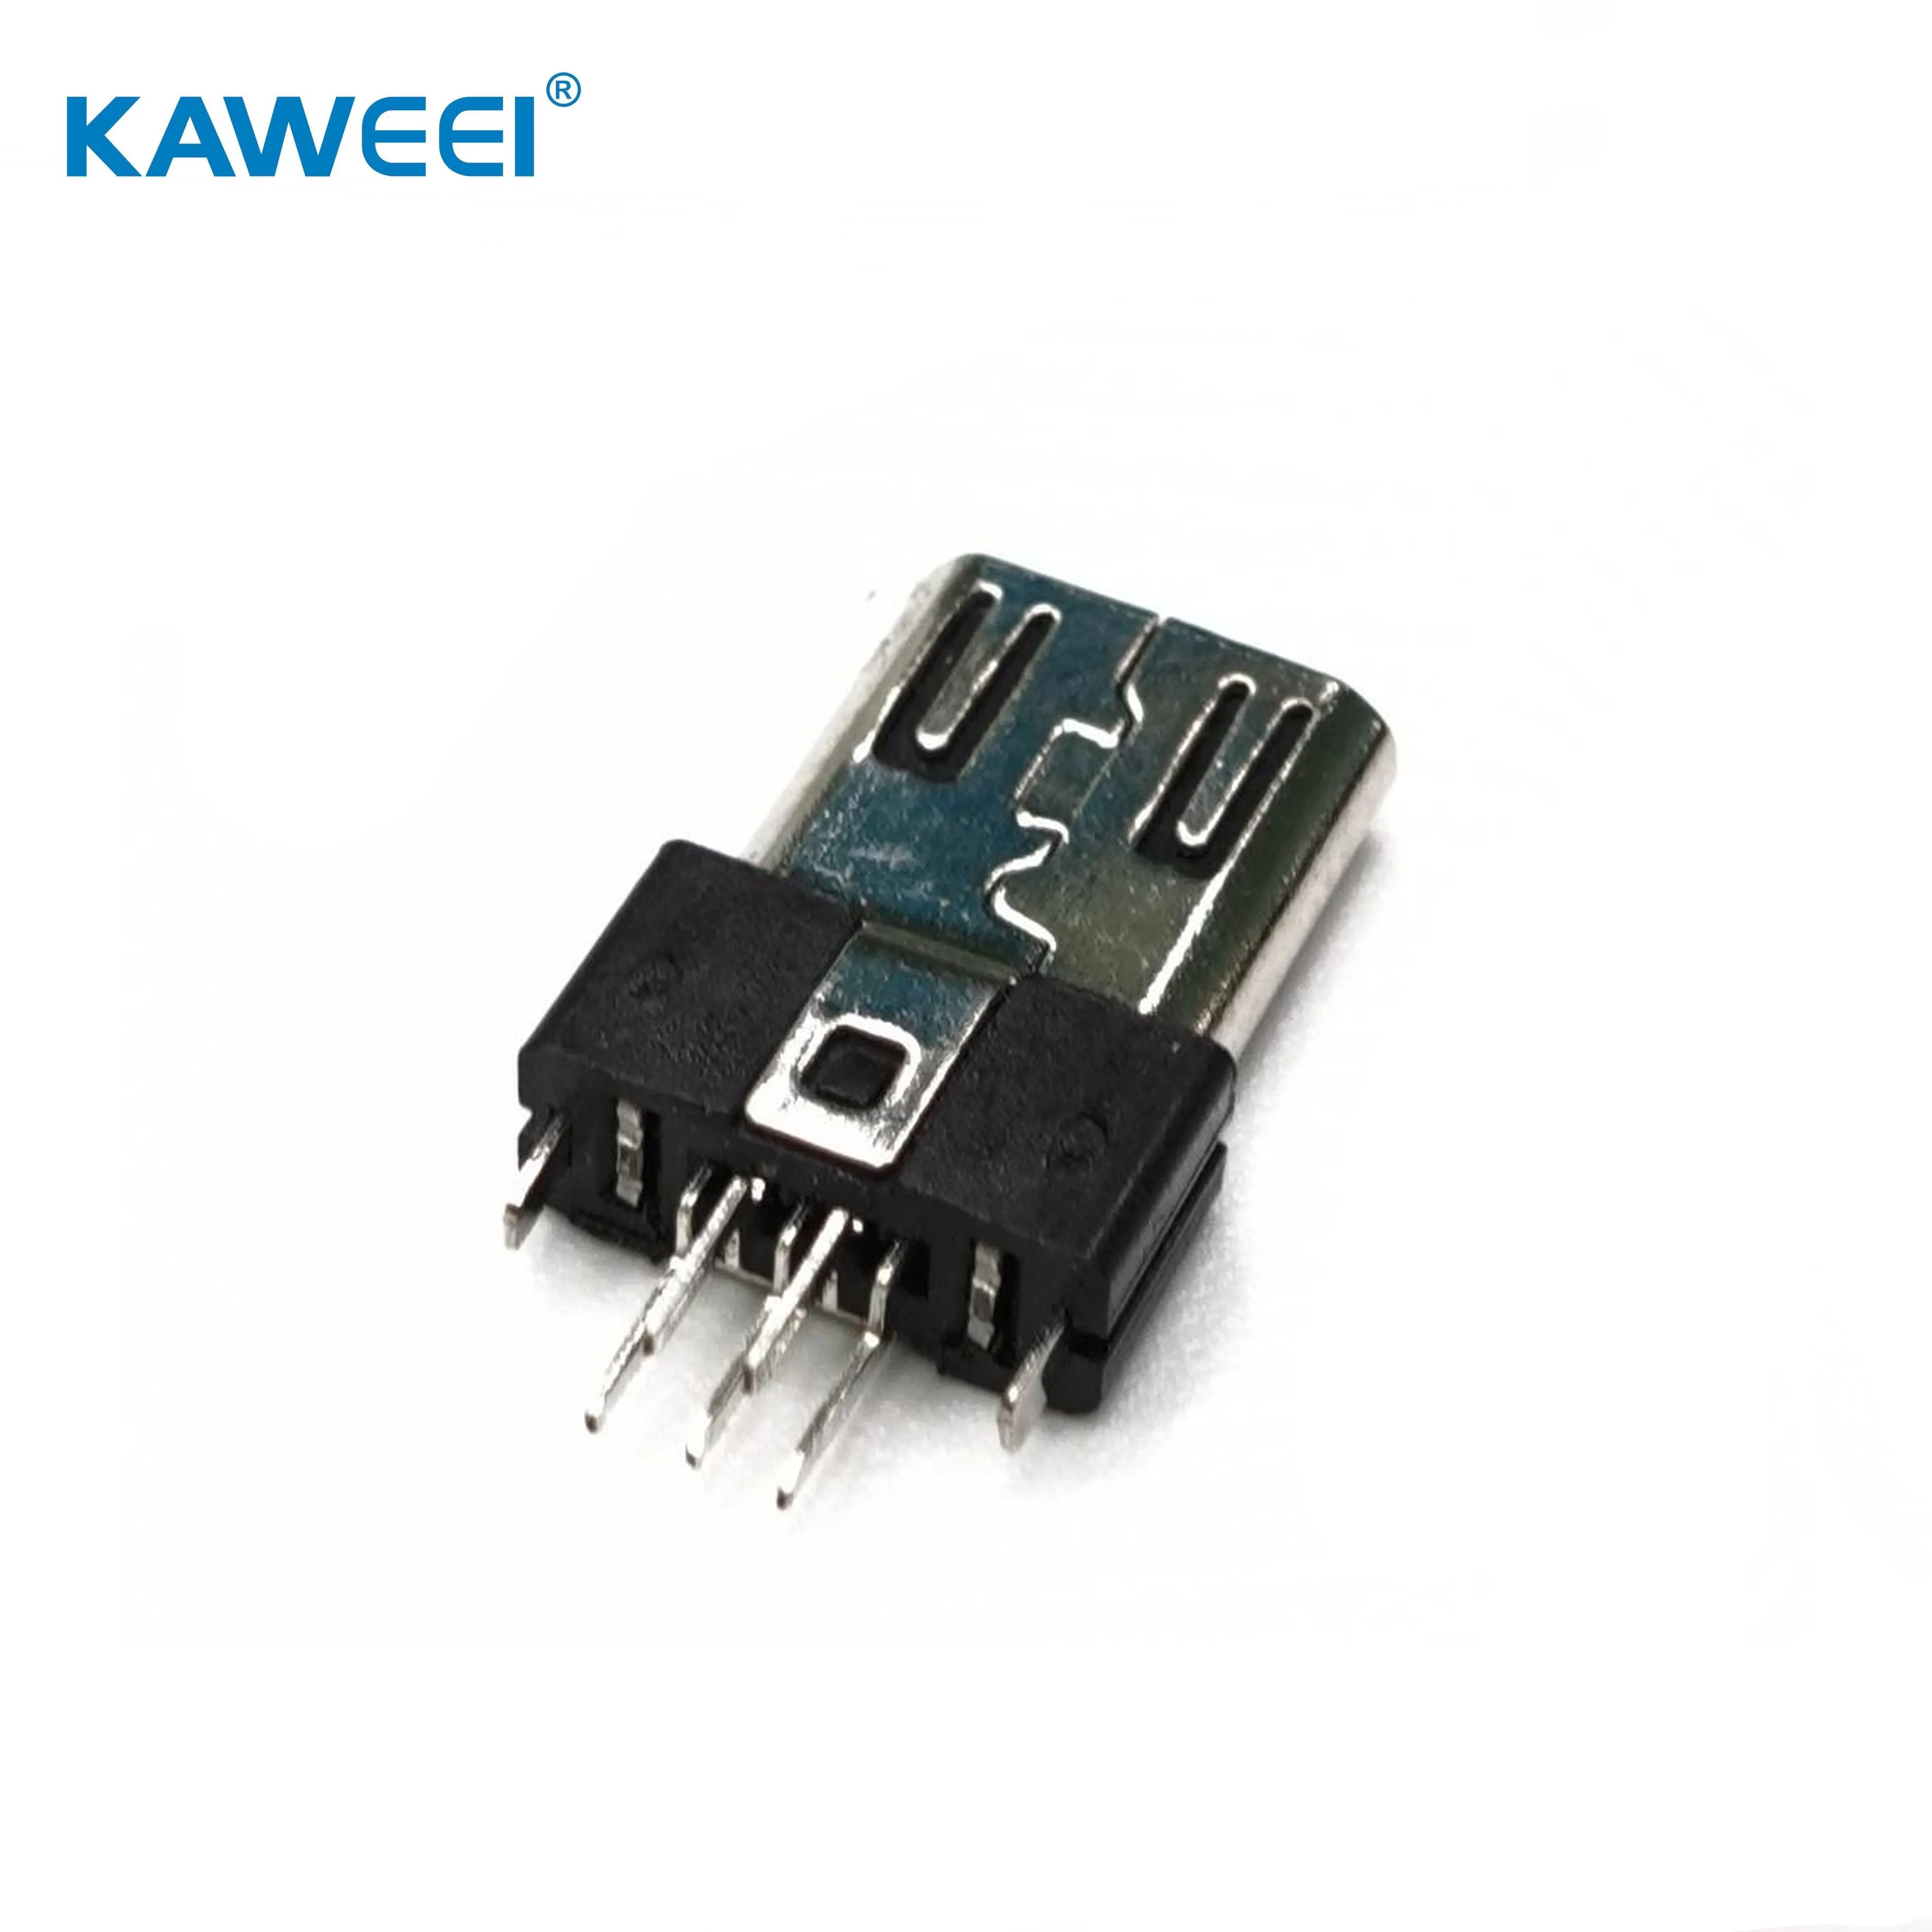 Customized High Quality Vertical Type Micro Mini USB SMD Male Connector 5 pin for Android Data Connector